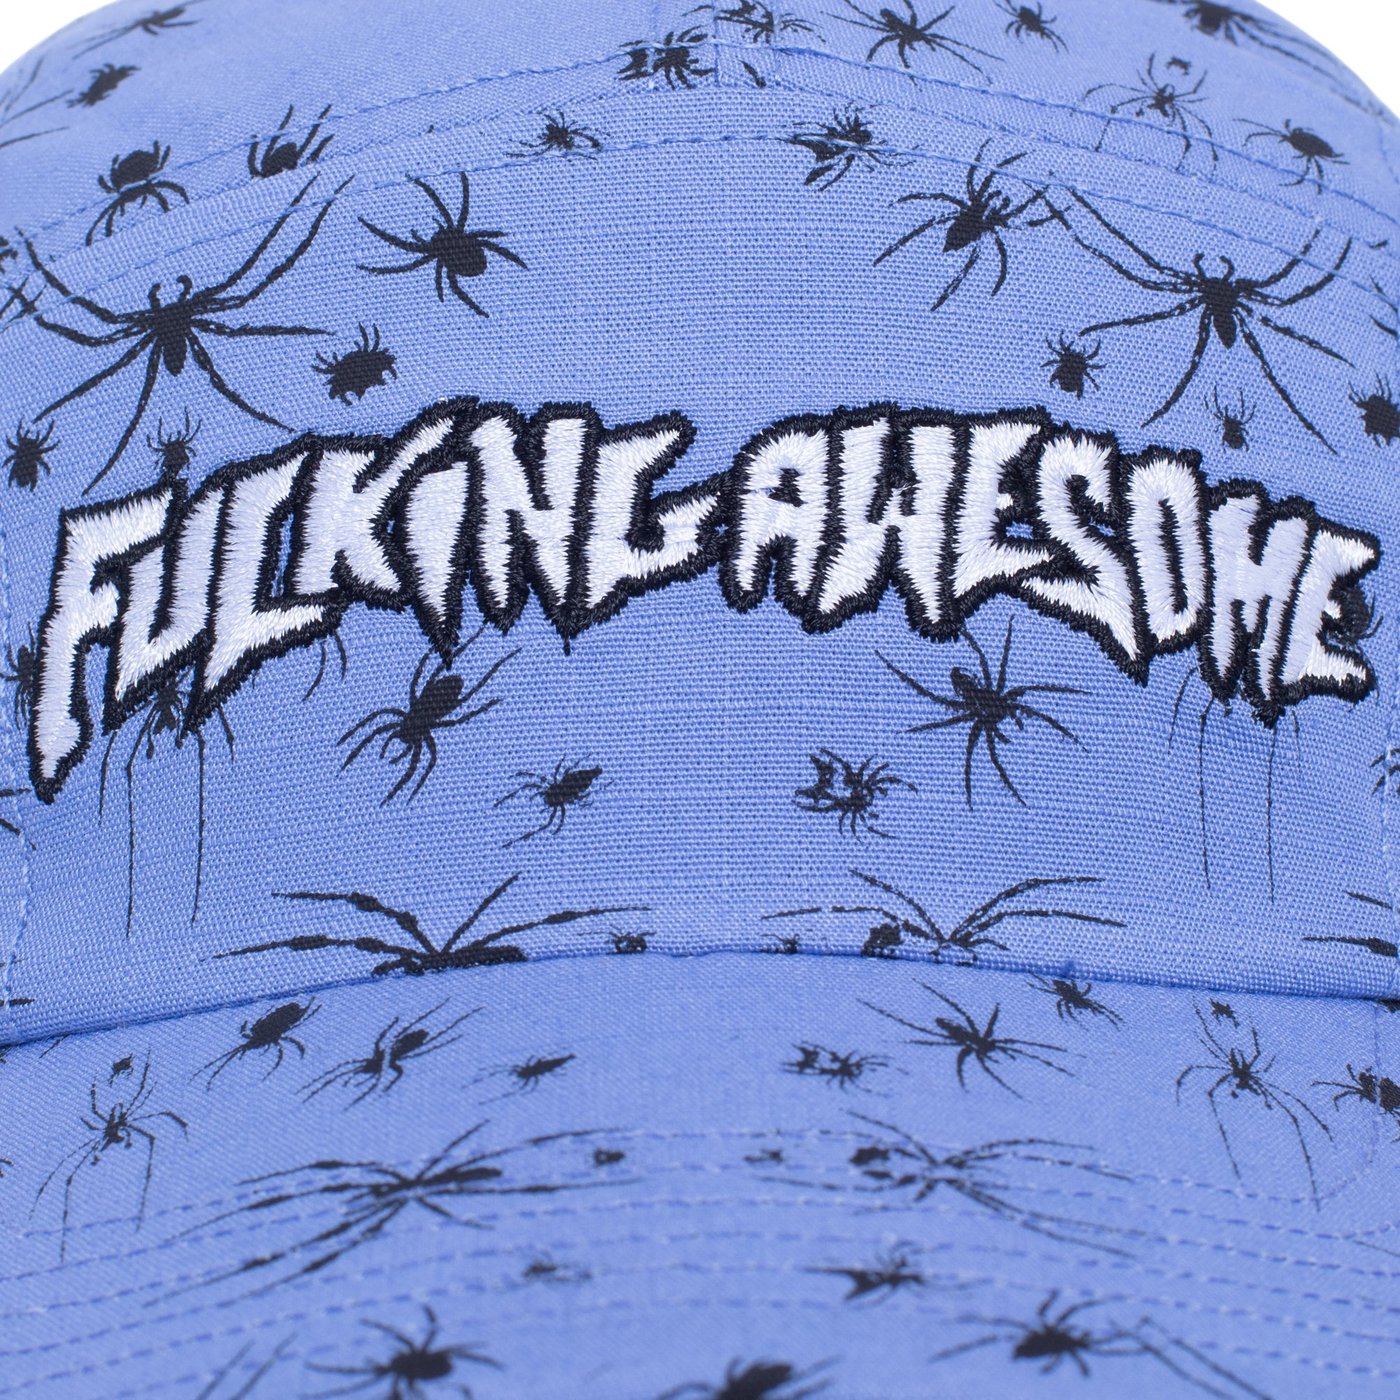 Fucking Awesome - Gorro Snapback Spider Stamp Volley Purple